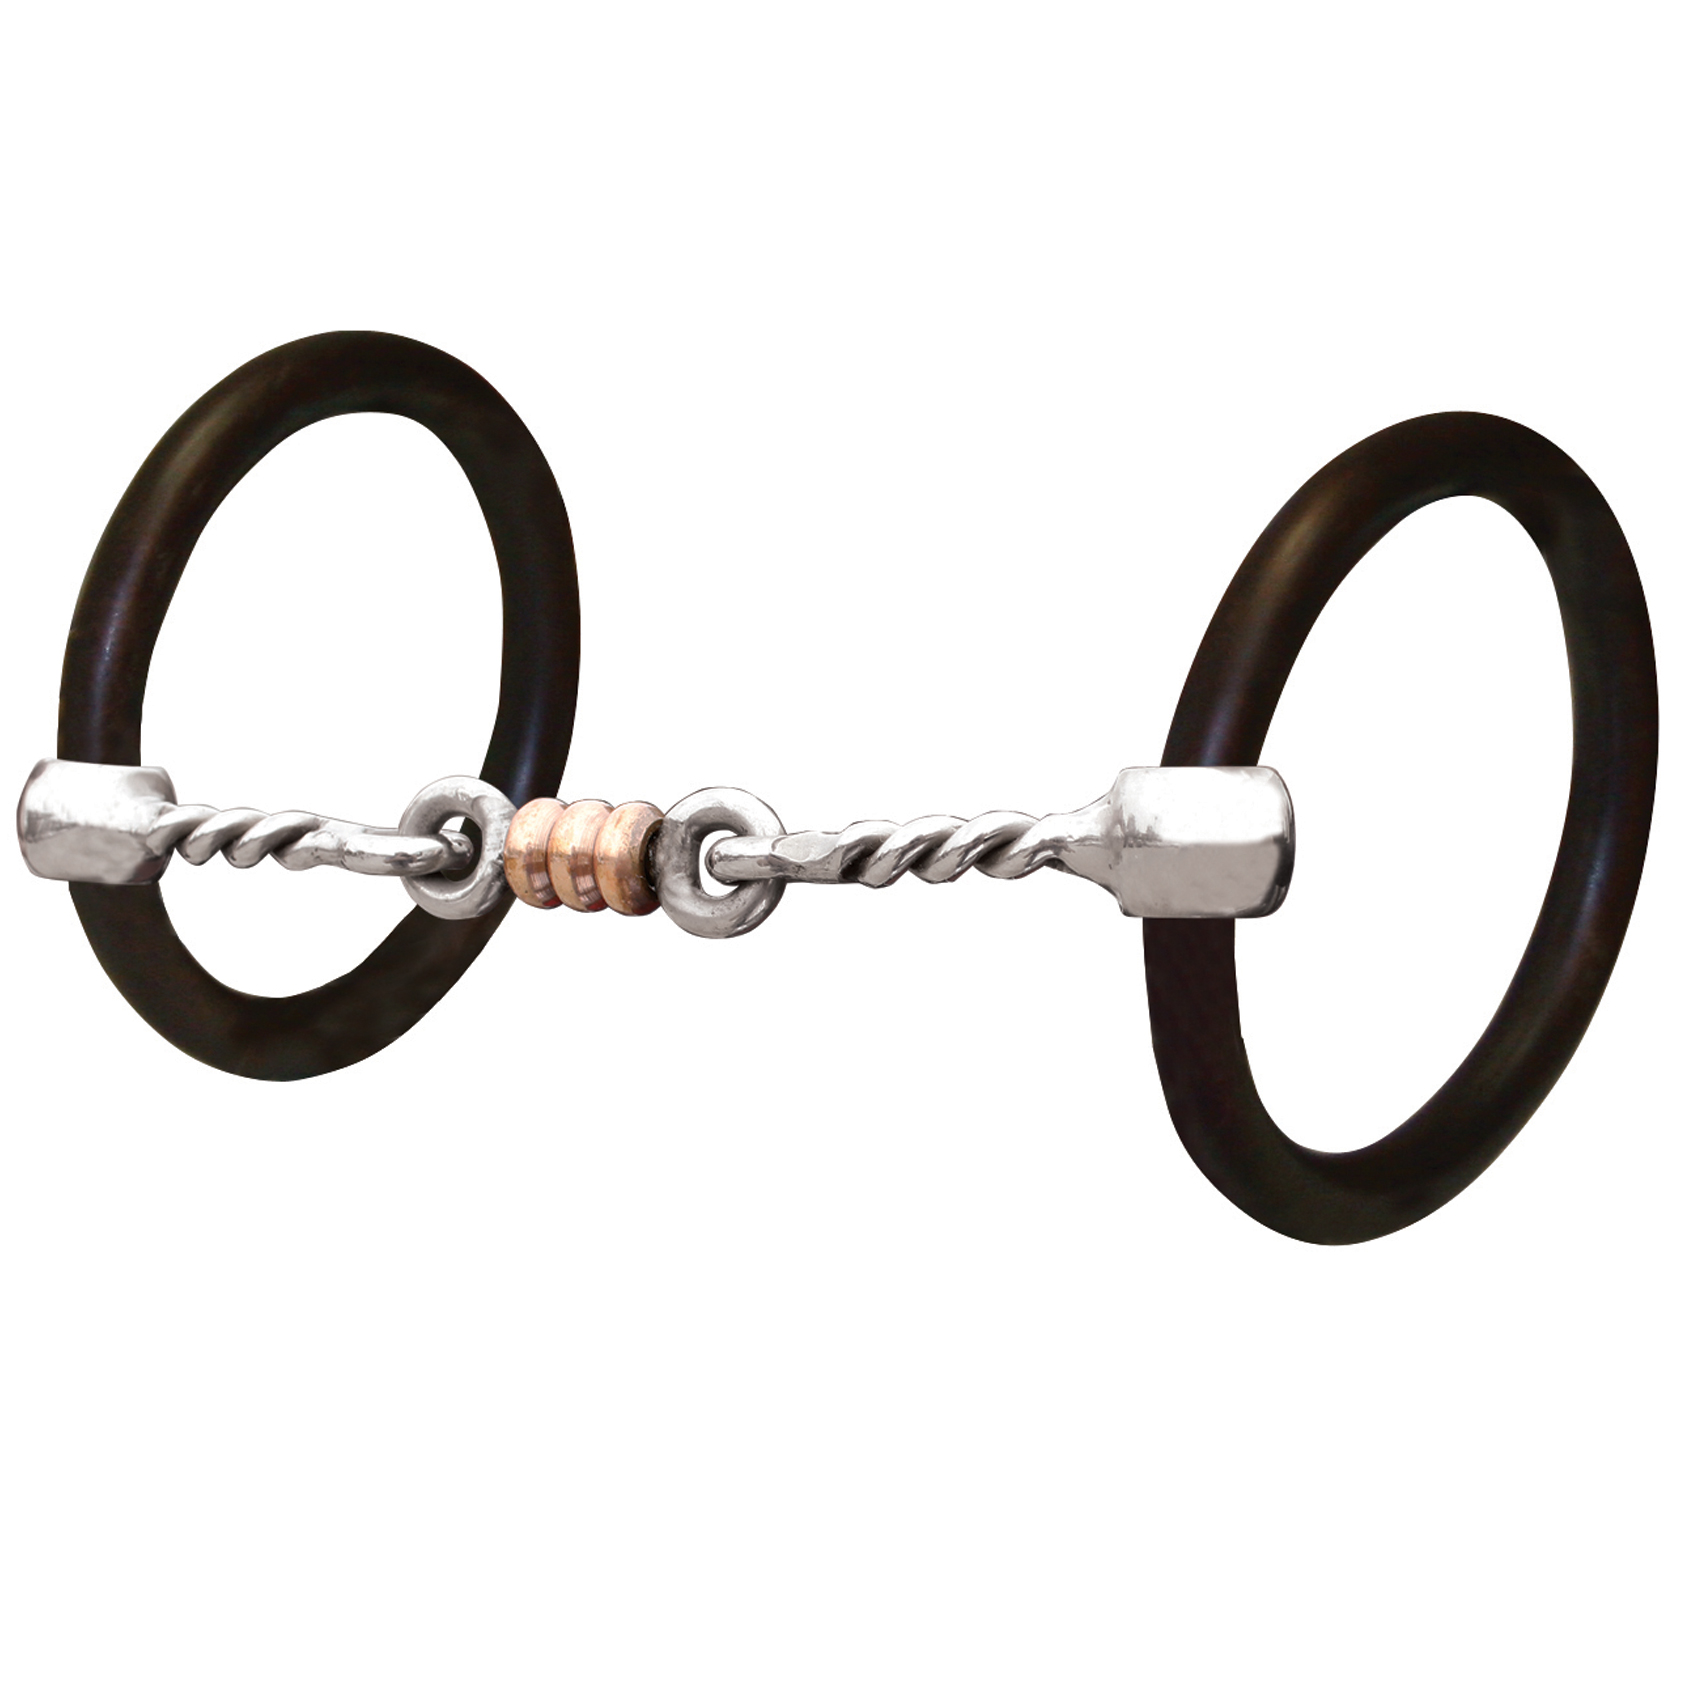 Weaver Leather All-Purpose Offset D-Ring Snaffle Bit with 5 in. Sweet Iron  Twisted Wire Mouthpiece at Tractor Supply Co.